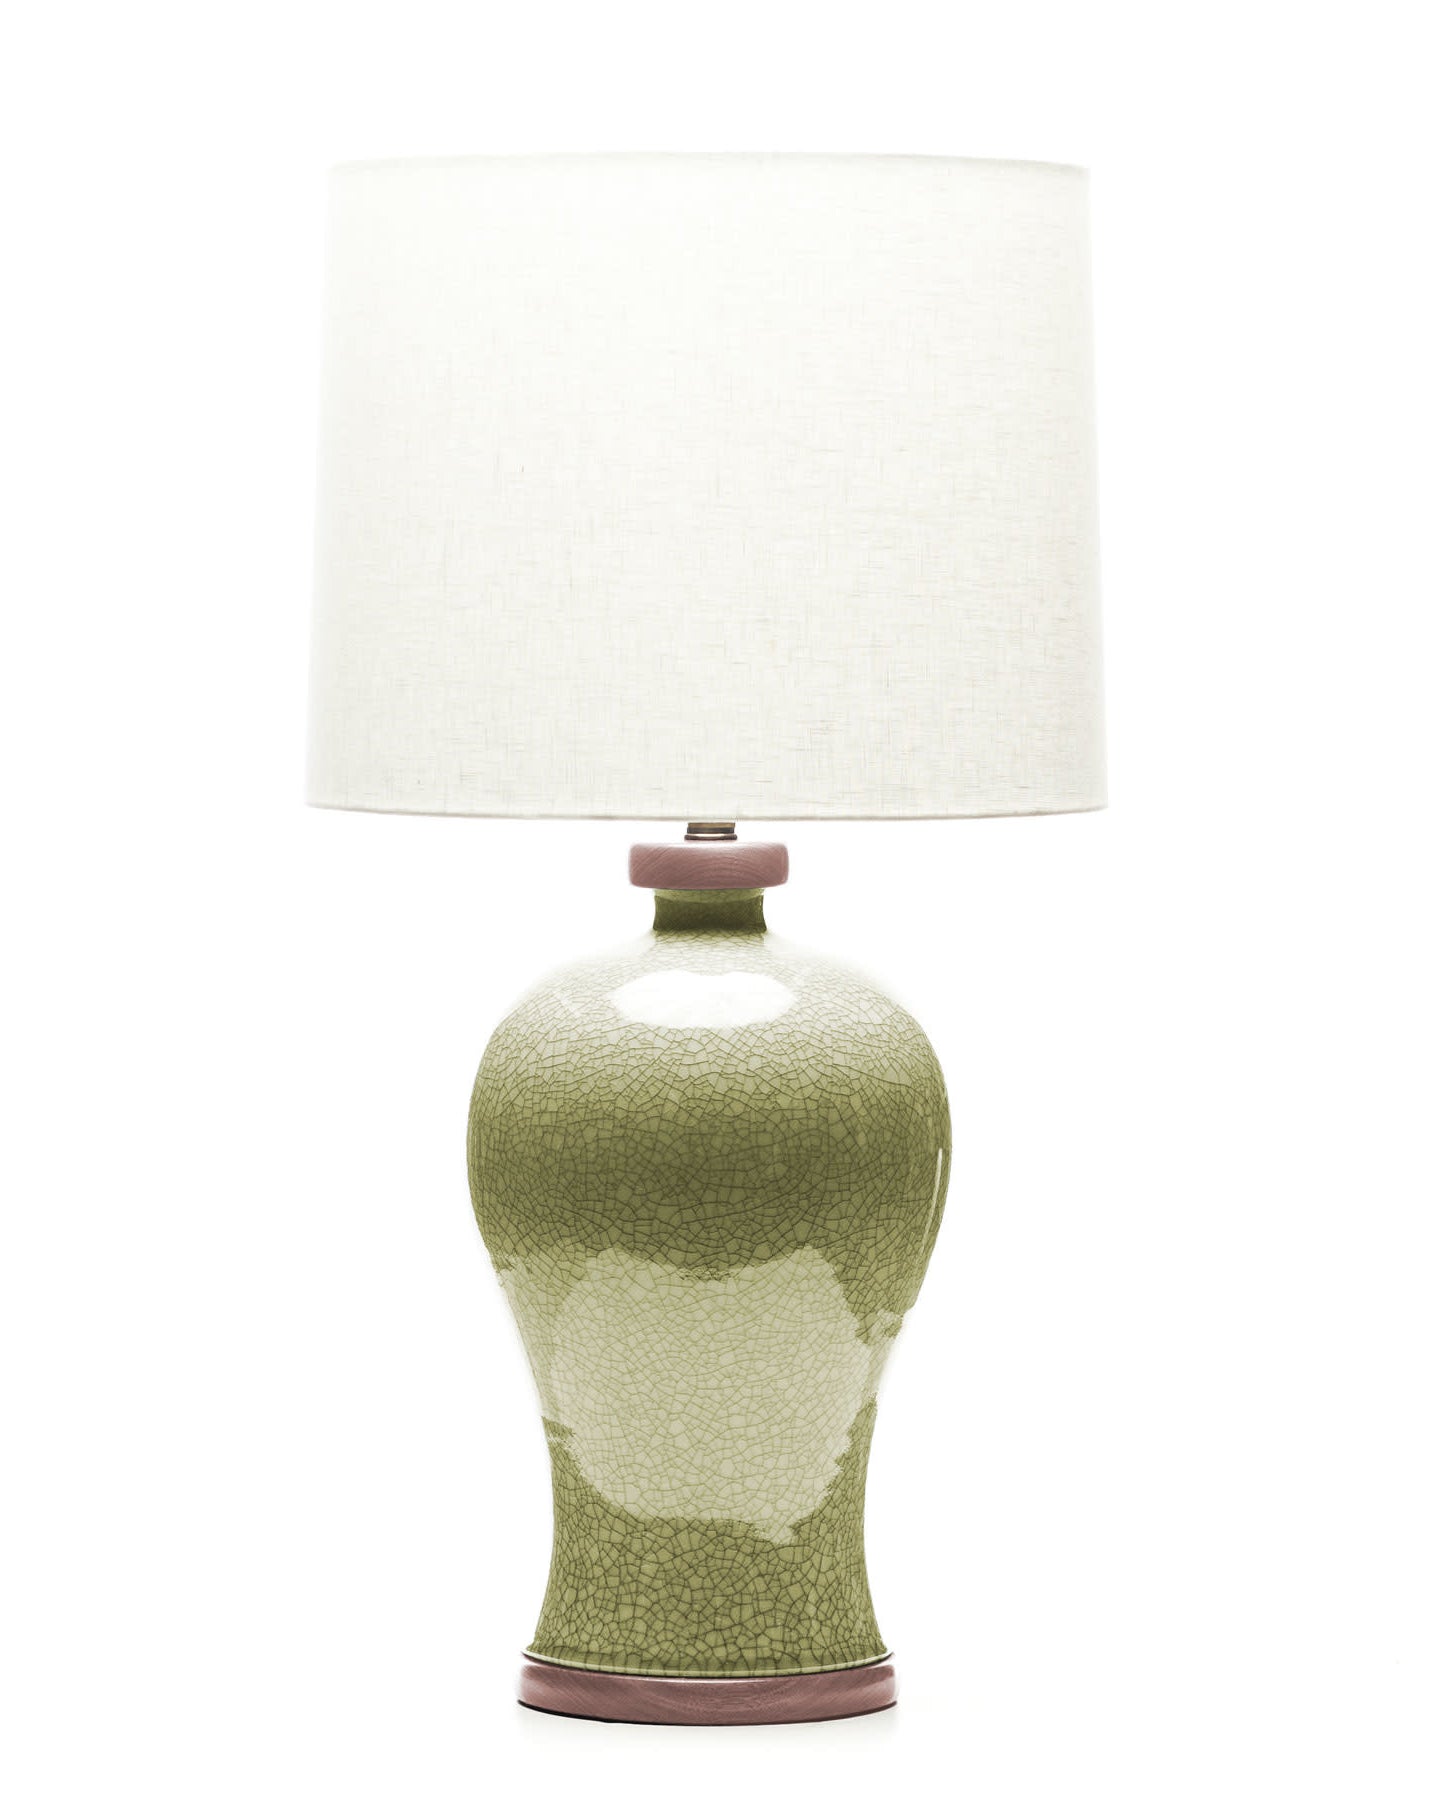 Lawrence & Scott Dashiell Table Lamp in Oyster Crackle with Sapele Base